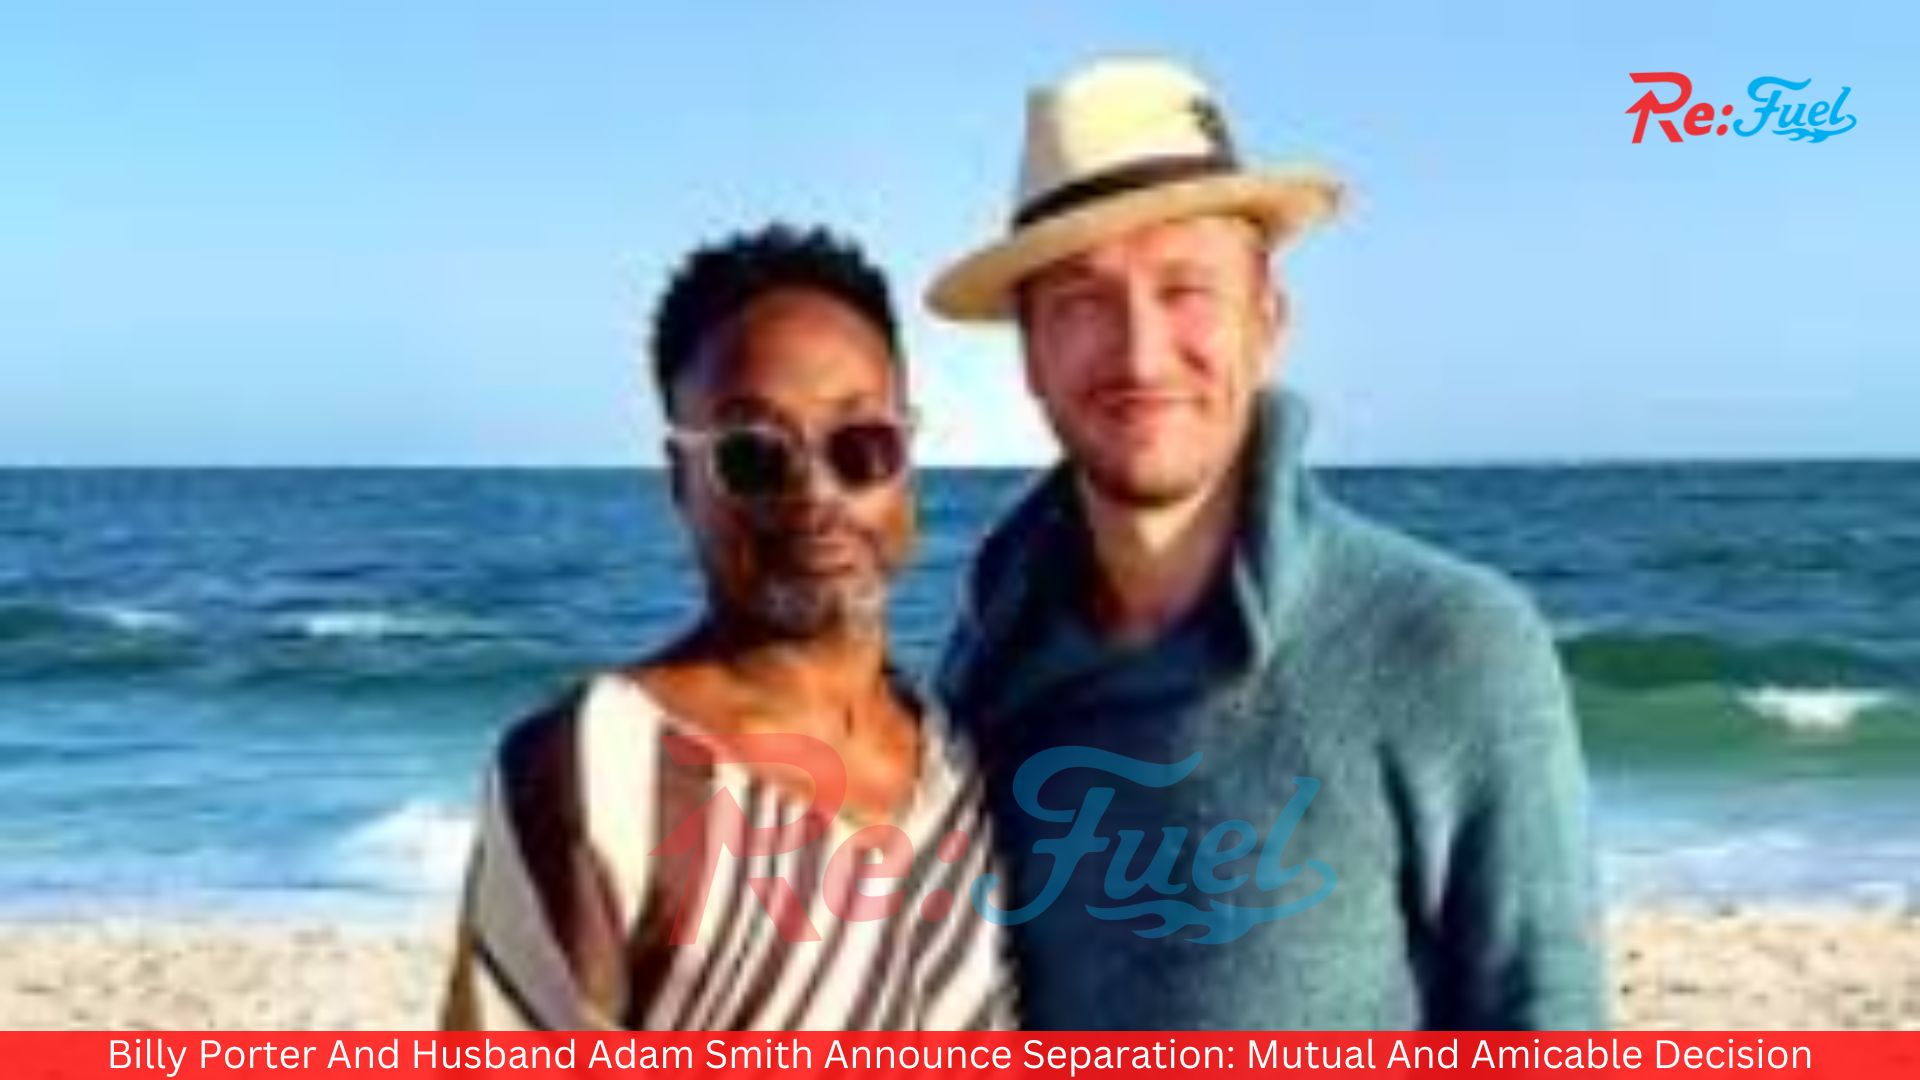 Billy Porter And Husband Adam Smith Announce Separation: Mutual And Amicable Decision